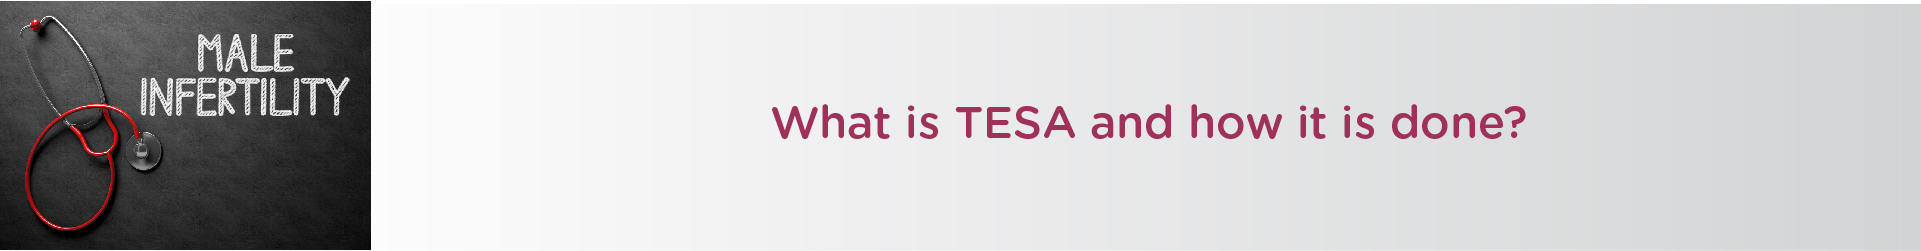 What is TESA and how is it done?